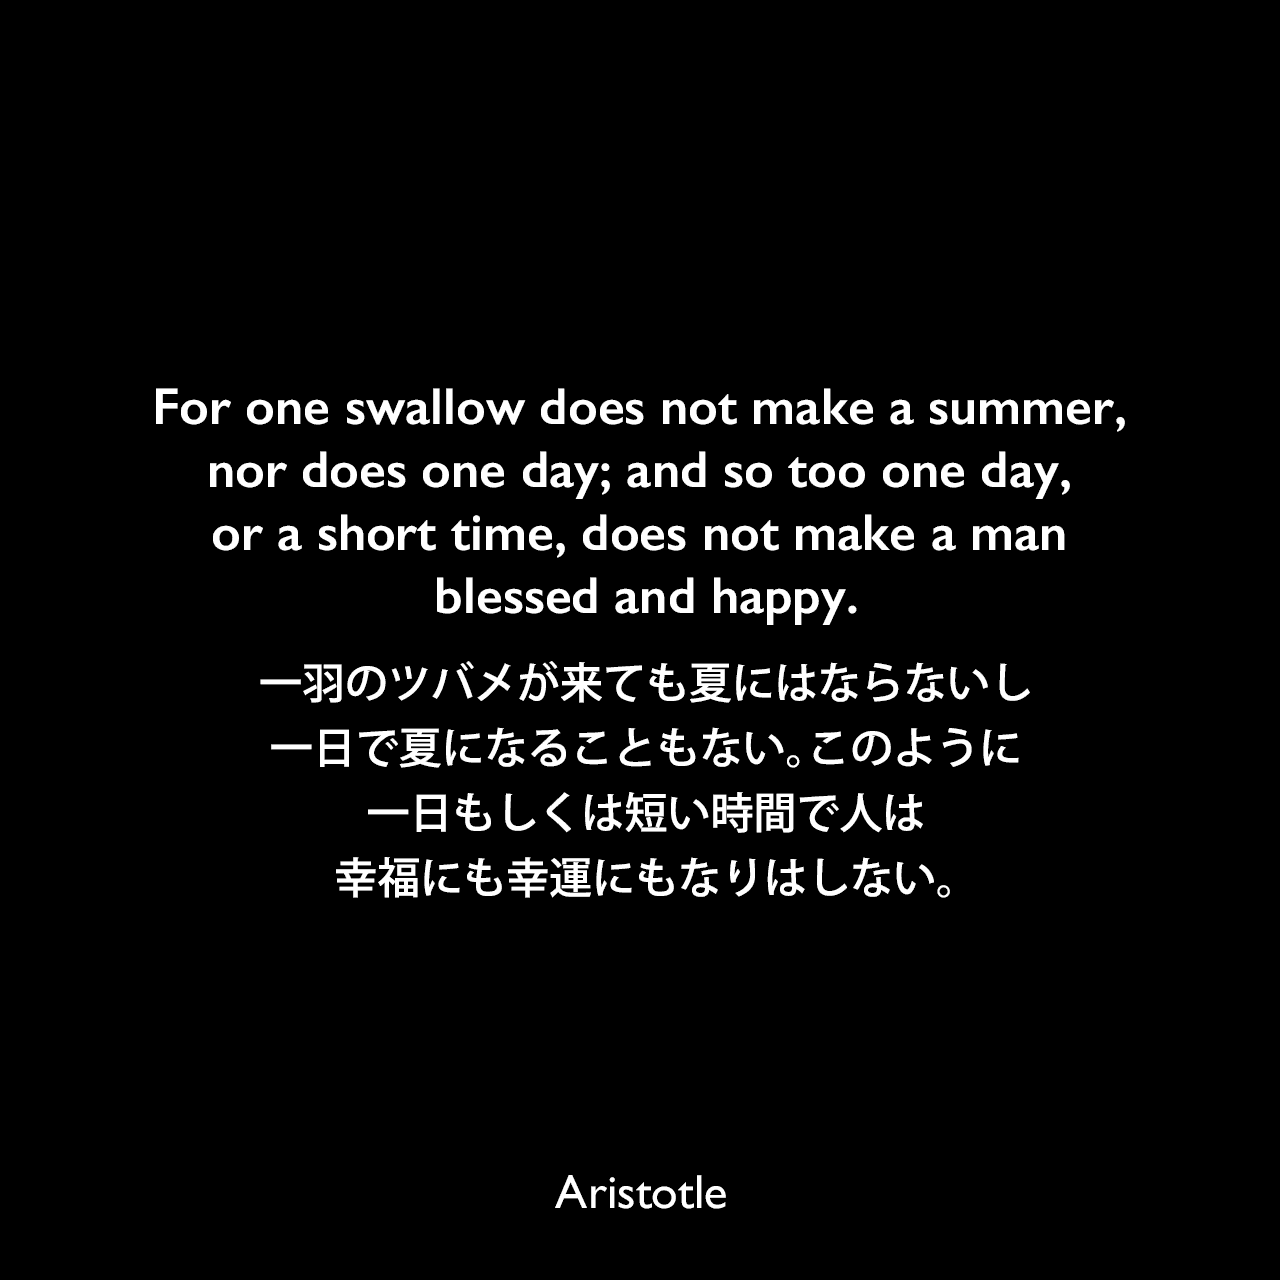 For one swallow does not make a summer, nor does one day; and so too one day, or a short time, does not make a man blessed and happy.一羽のツバメが来ても夏にはならないし、一日で夏になることもない。このように、一日もしくは短い時間で人は幸福にも幸運にもなりはしない。- アリストテレスの著書「ニコマコス倫理学」よりAristotle